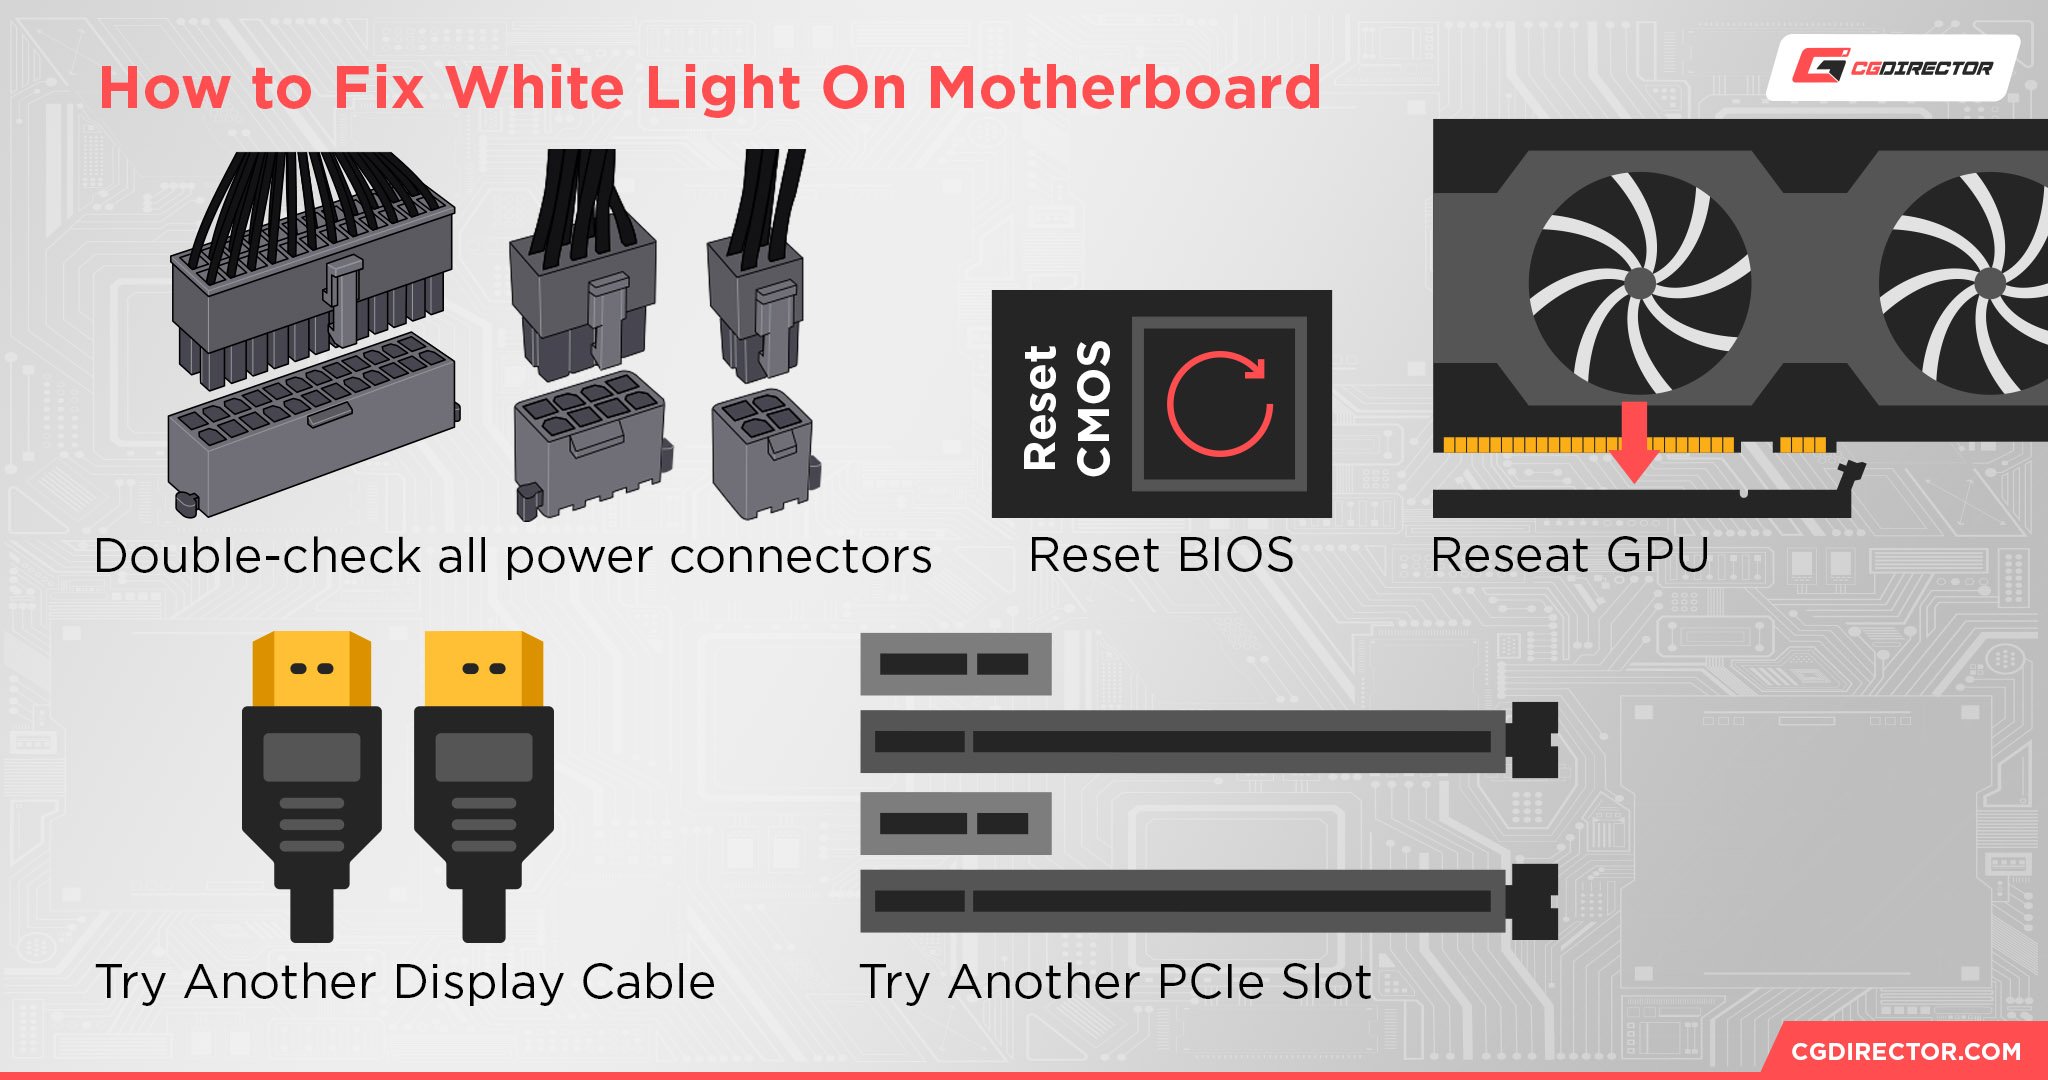 How to Fix White Light On Motherboard